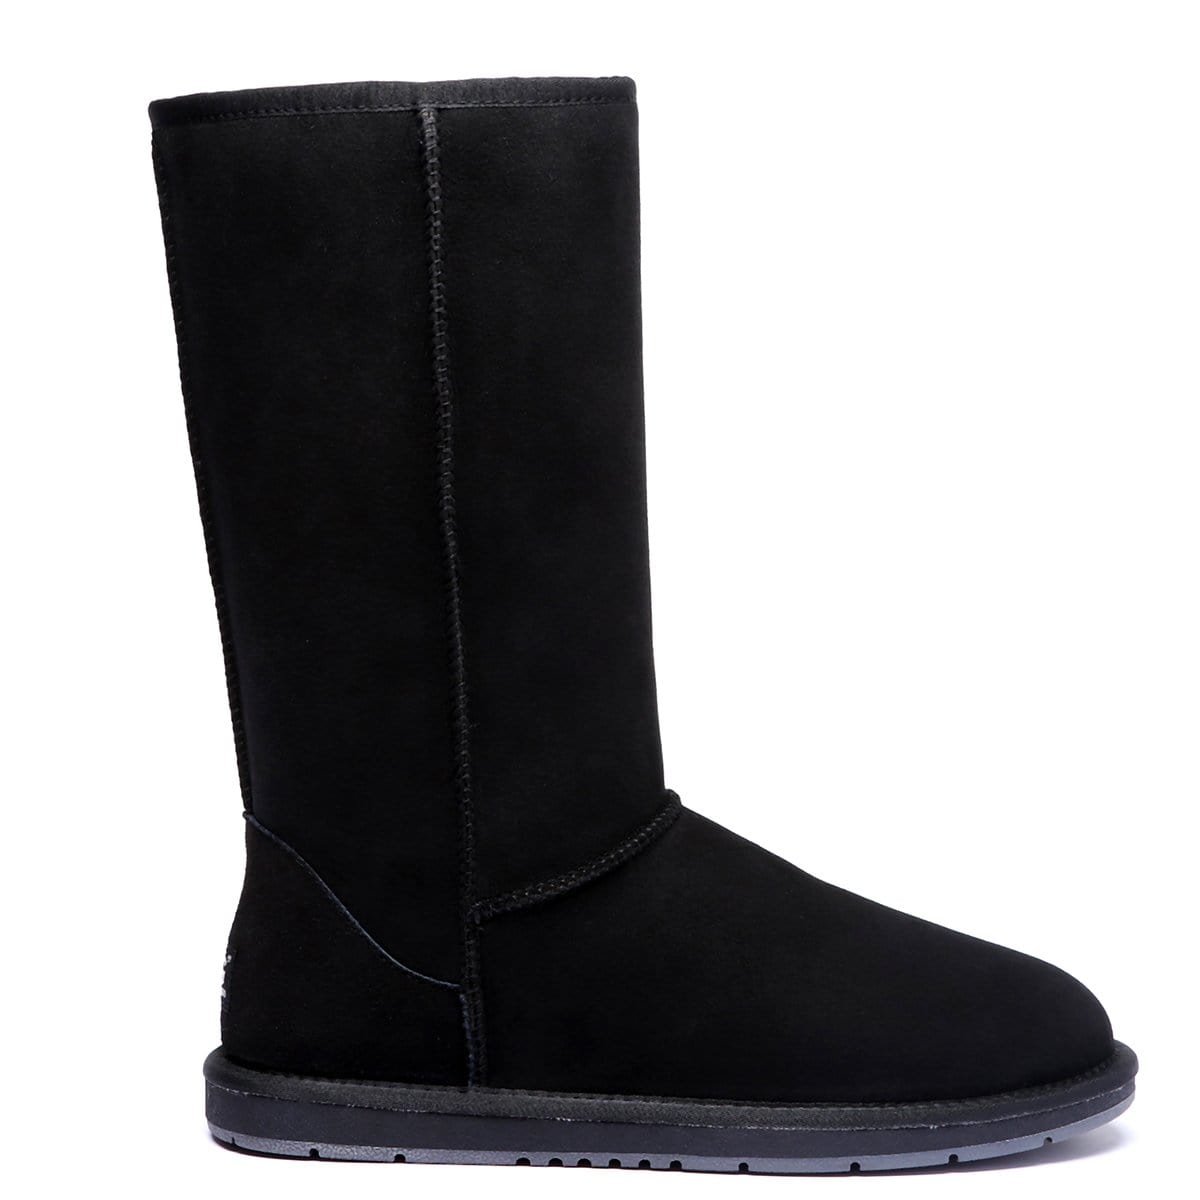 Classic Tall UGG Boots